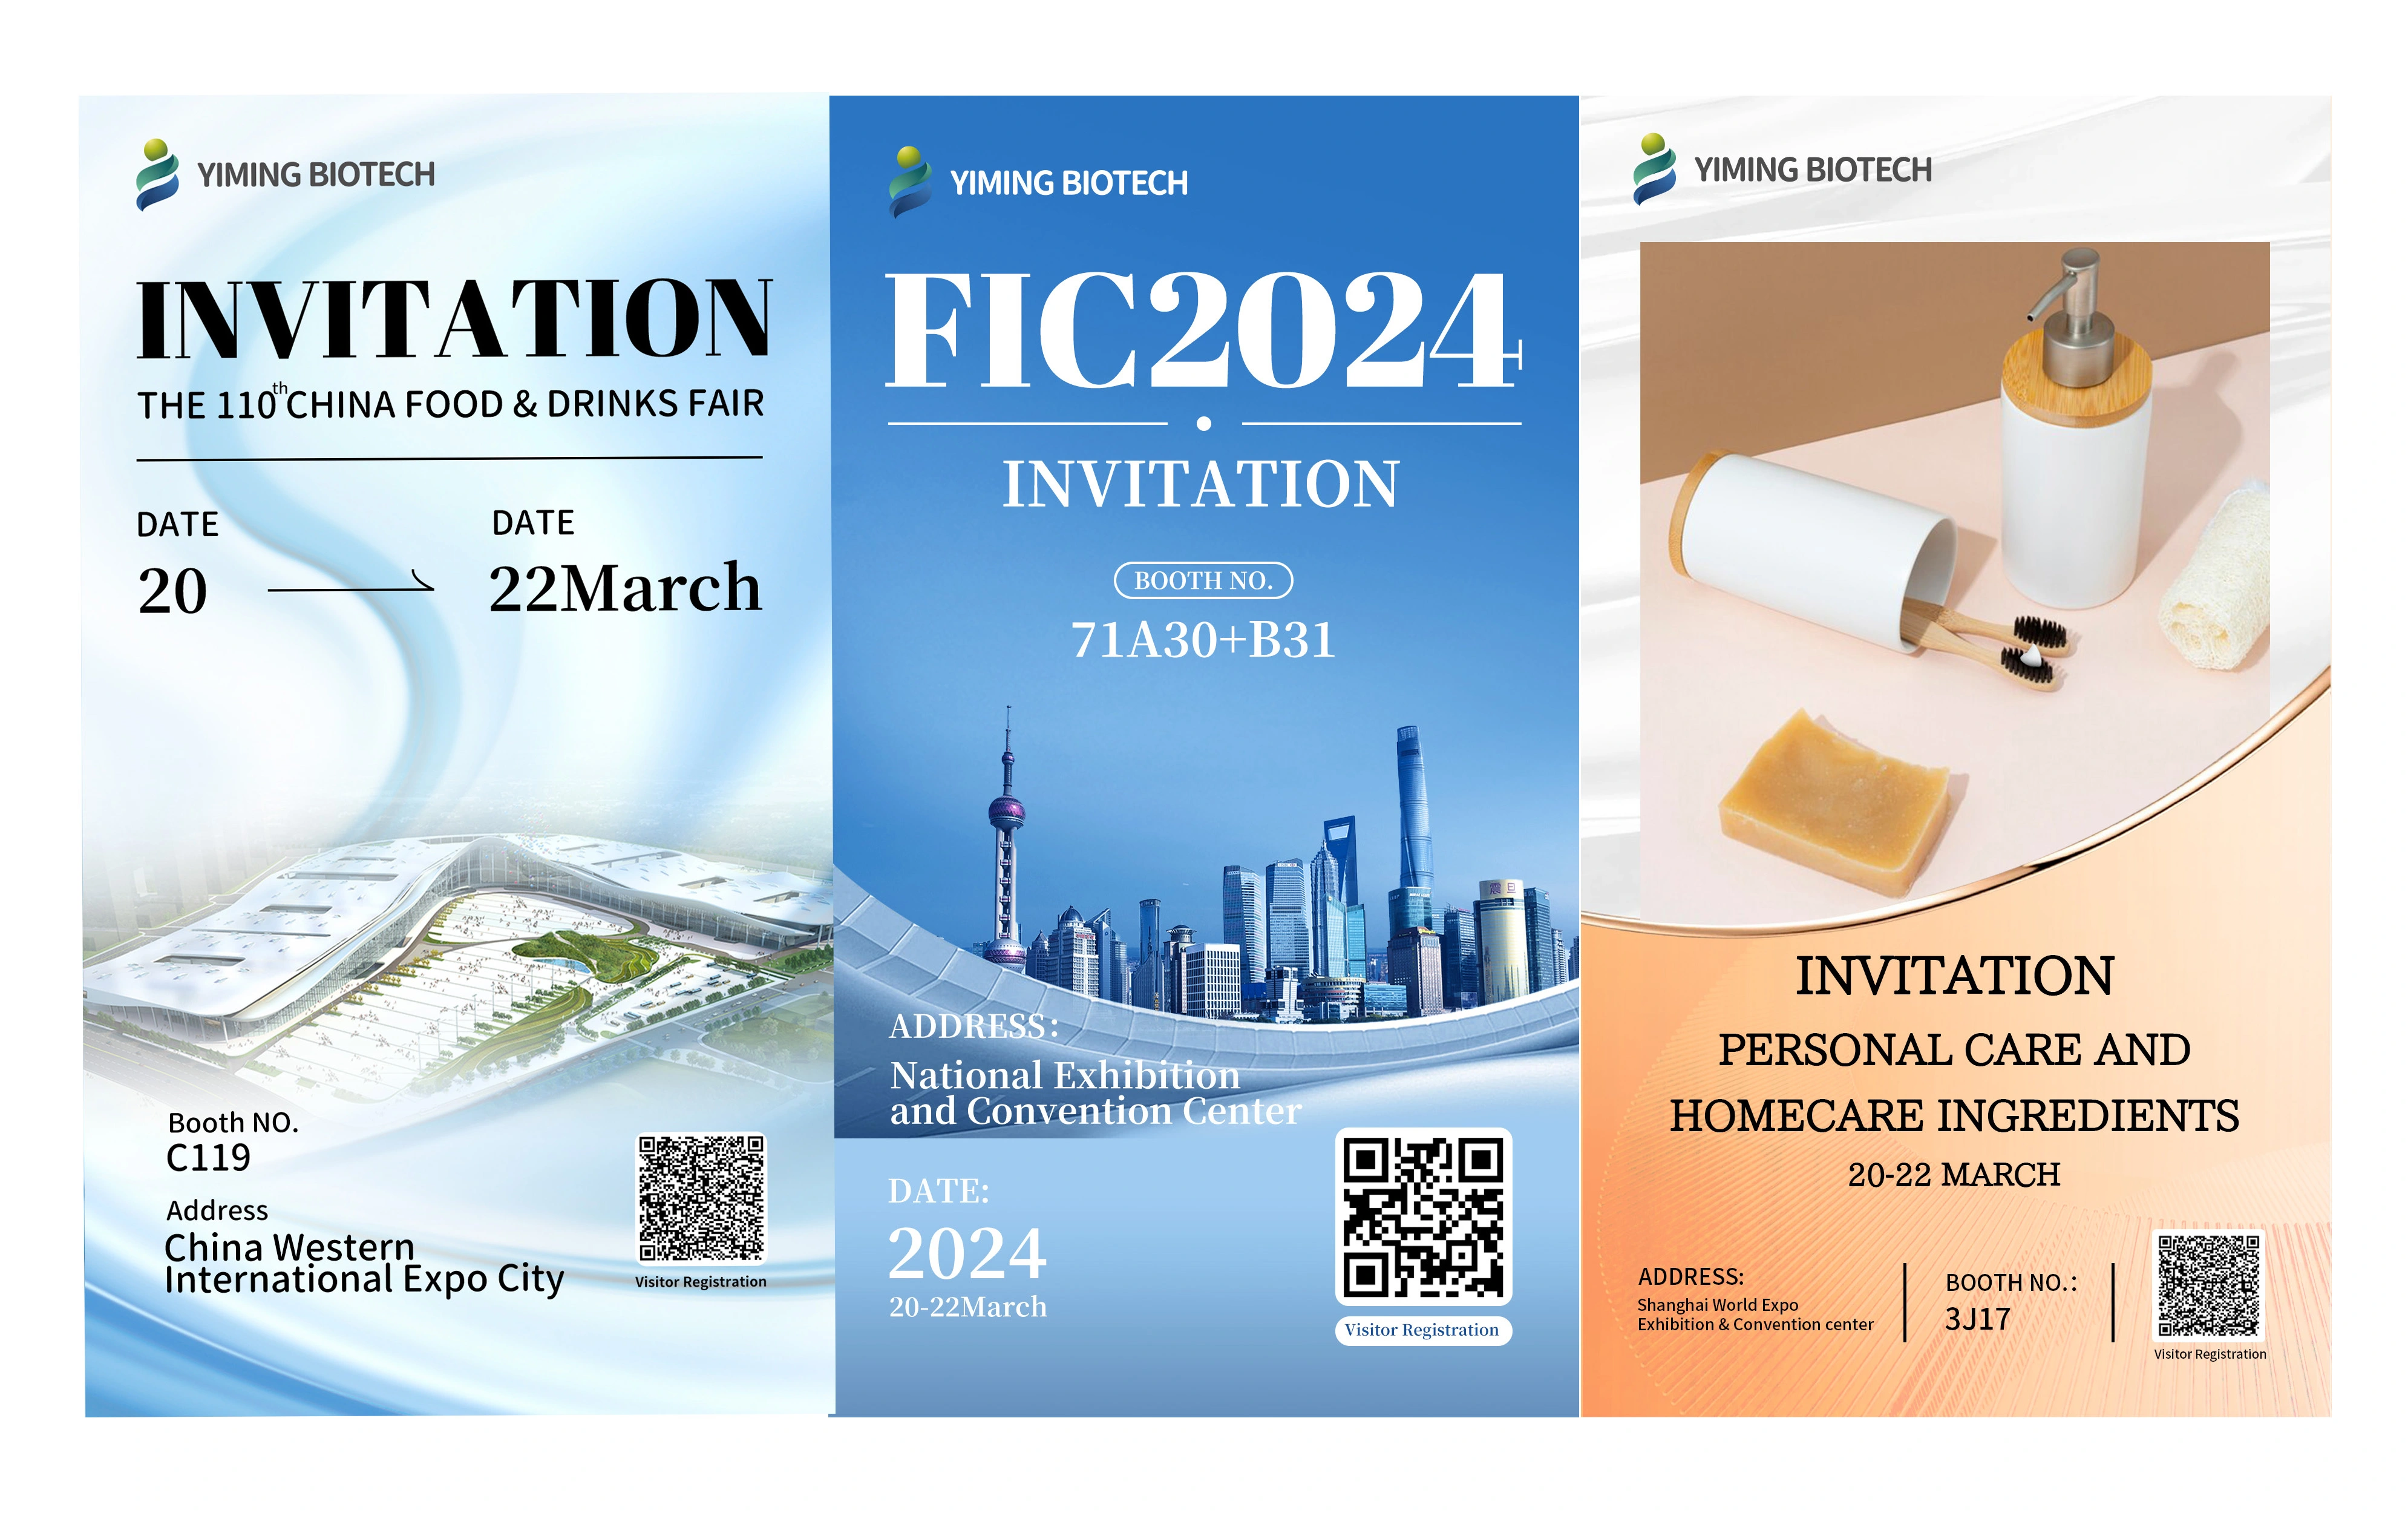 Invitations | Yiming Biotech Exhibition Information